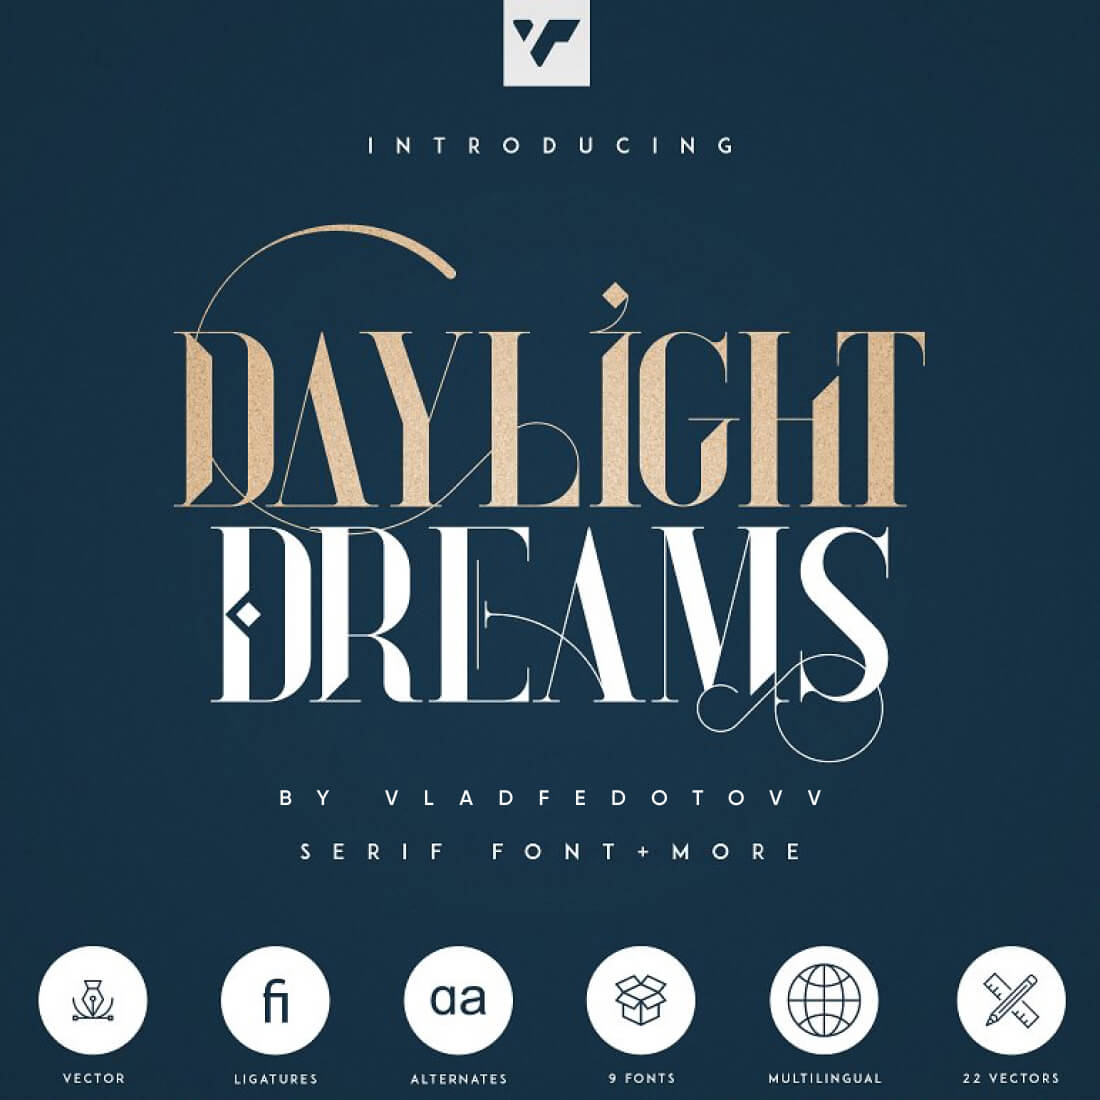 Tall Serif Font Daylight Dreams Extras cover image.